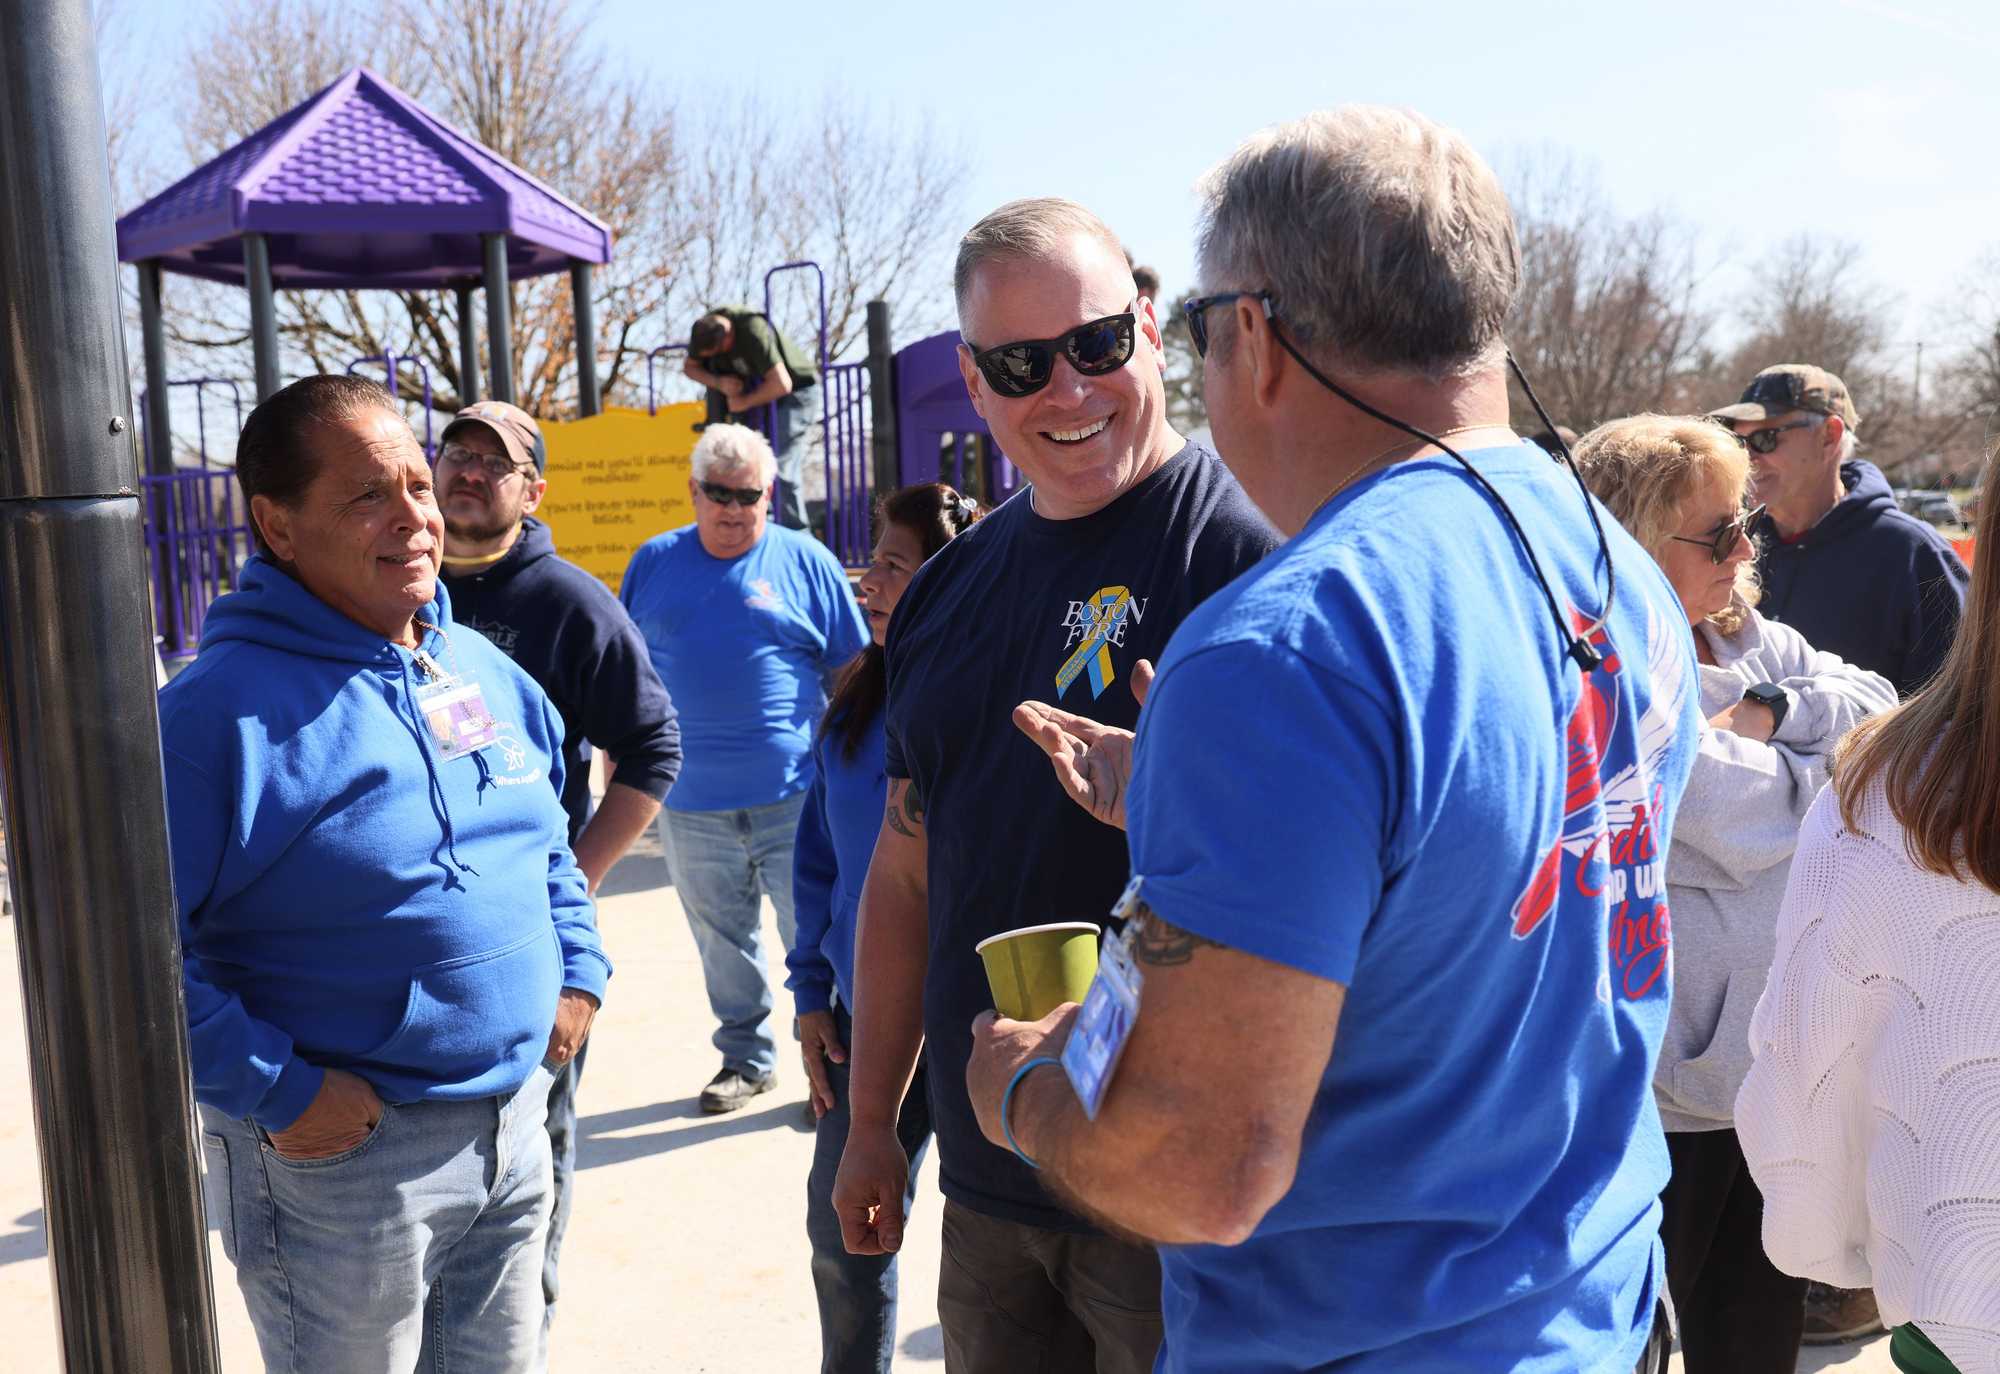 Jimmy Plourde chatted with other volunteers who came together to help build a playground for Where Angels play, an organization spun out of the Sandy Hook massacre that builds playgrounds in underserved areas.